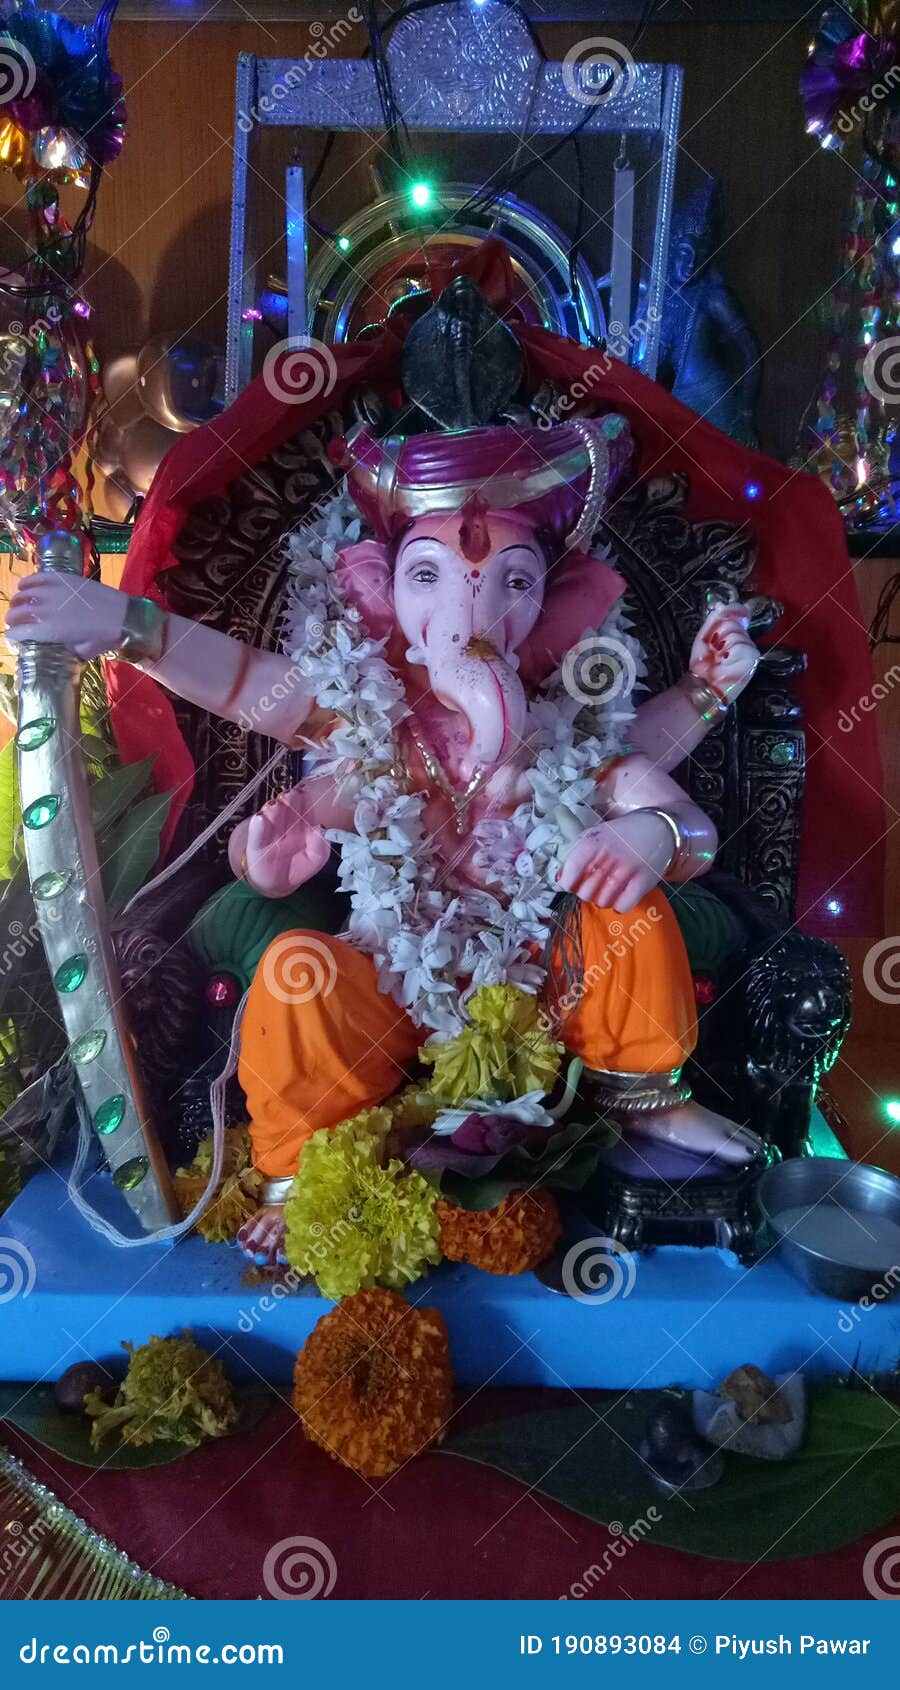 Ganpati Bappa at Our House Holding Sword Editorial Stock Image ...